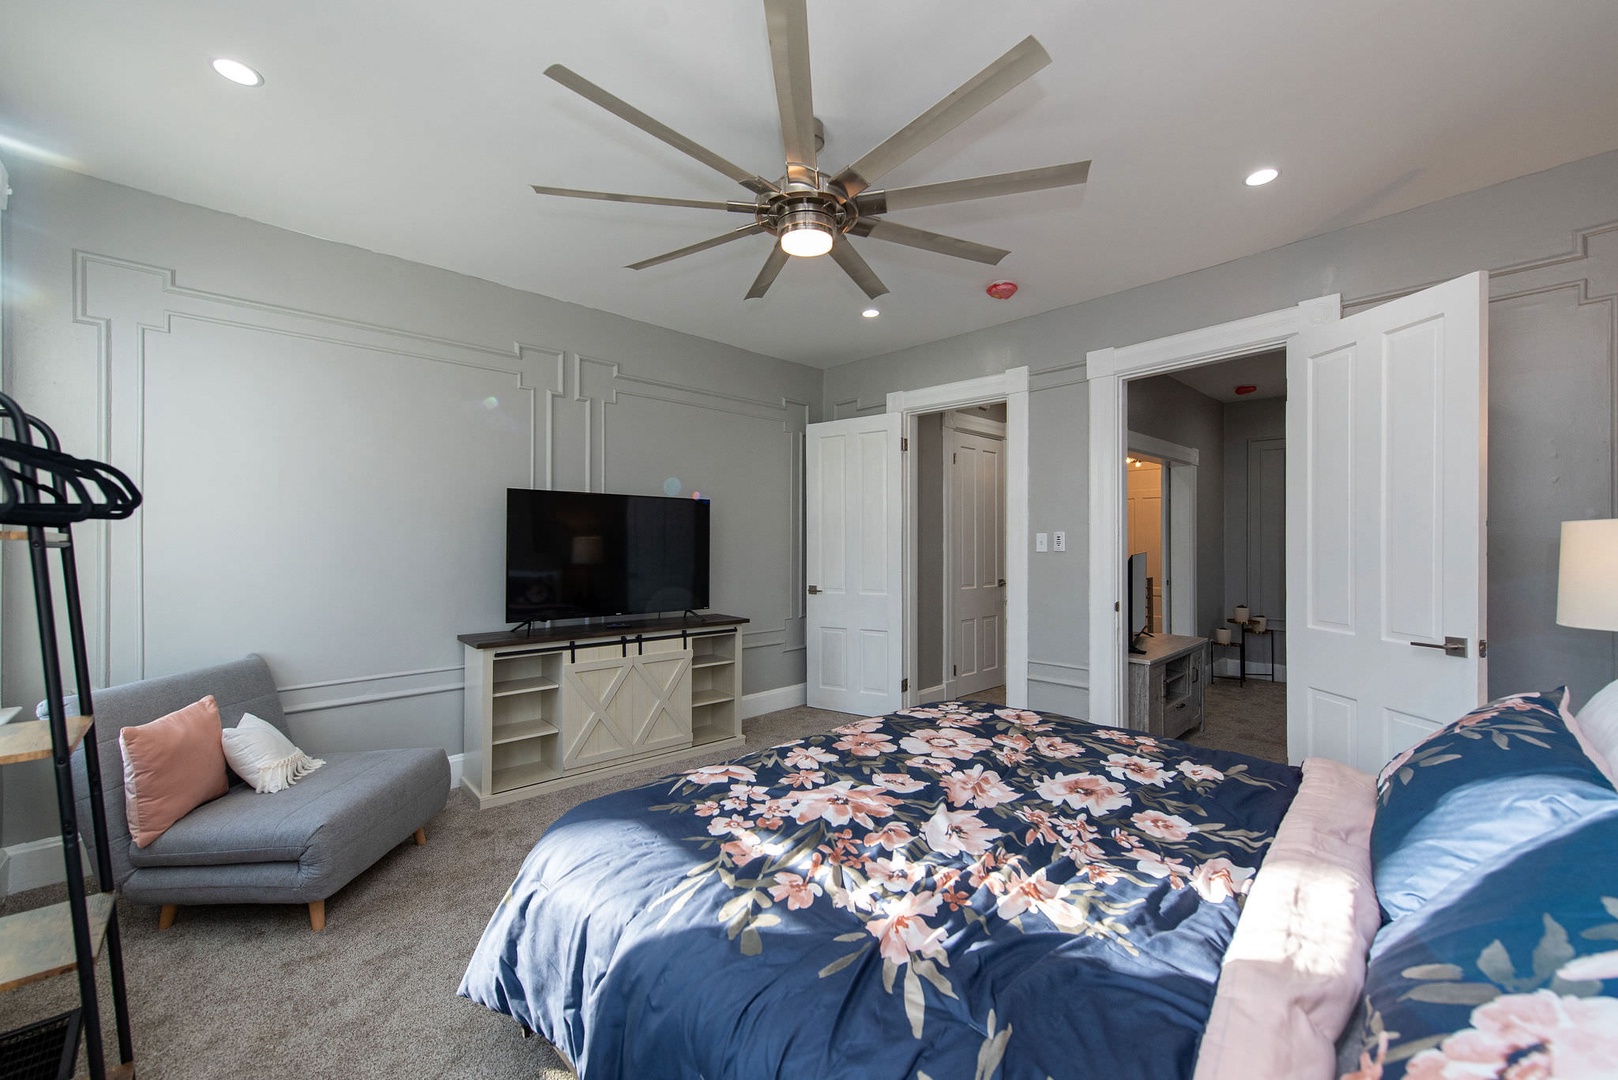 Suite 2 – The primary bedroom offers a king bed, Smart TV, & ceiling fan